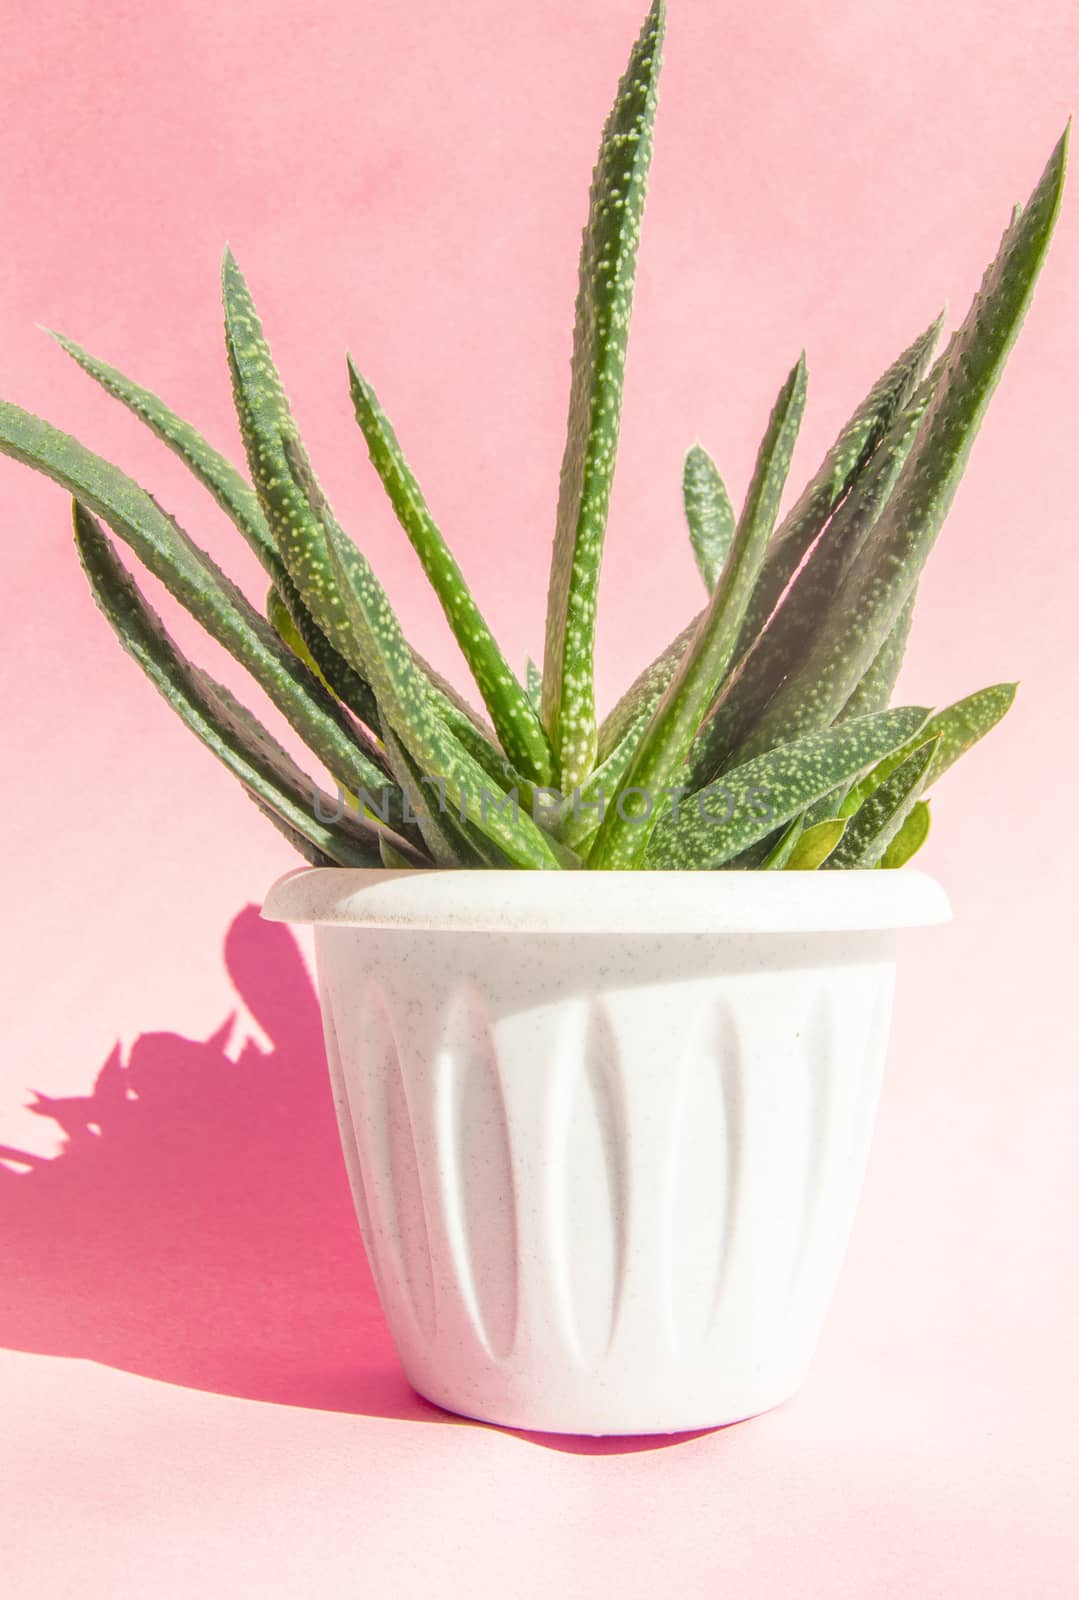 Aloe Vera plant in a white flower pot on a light pink background with sunlight and hard shadow. Concept of growing indoor plants succulents.